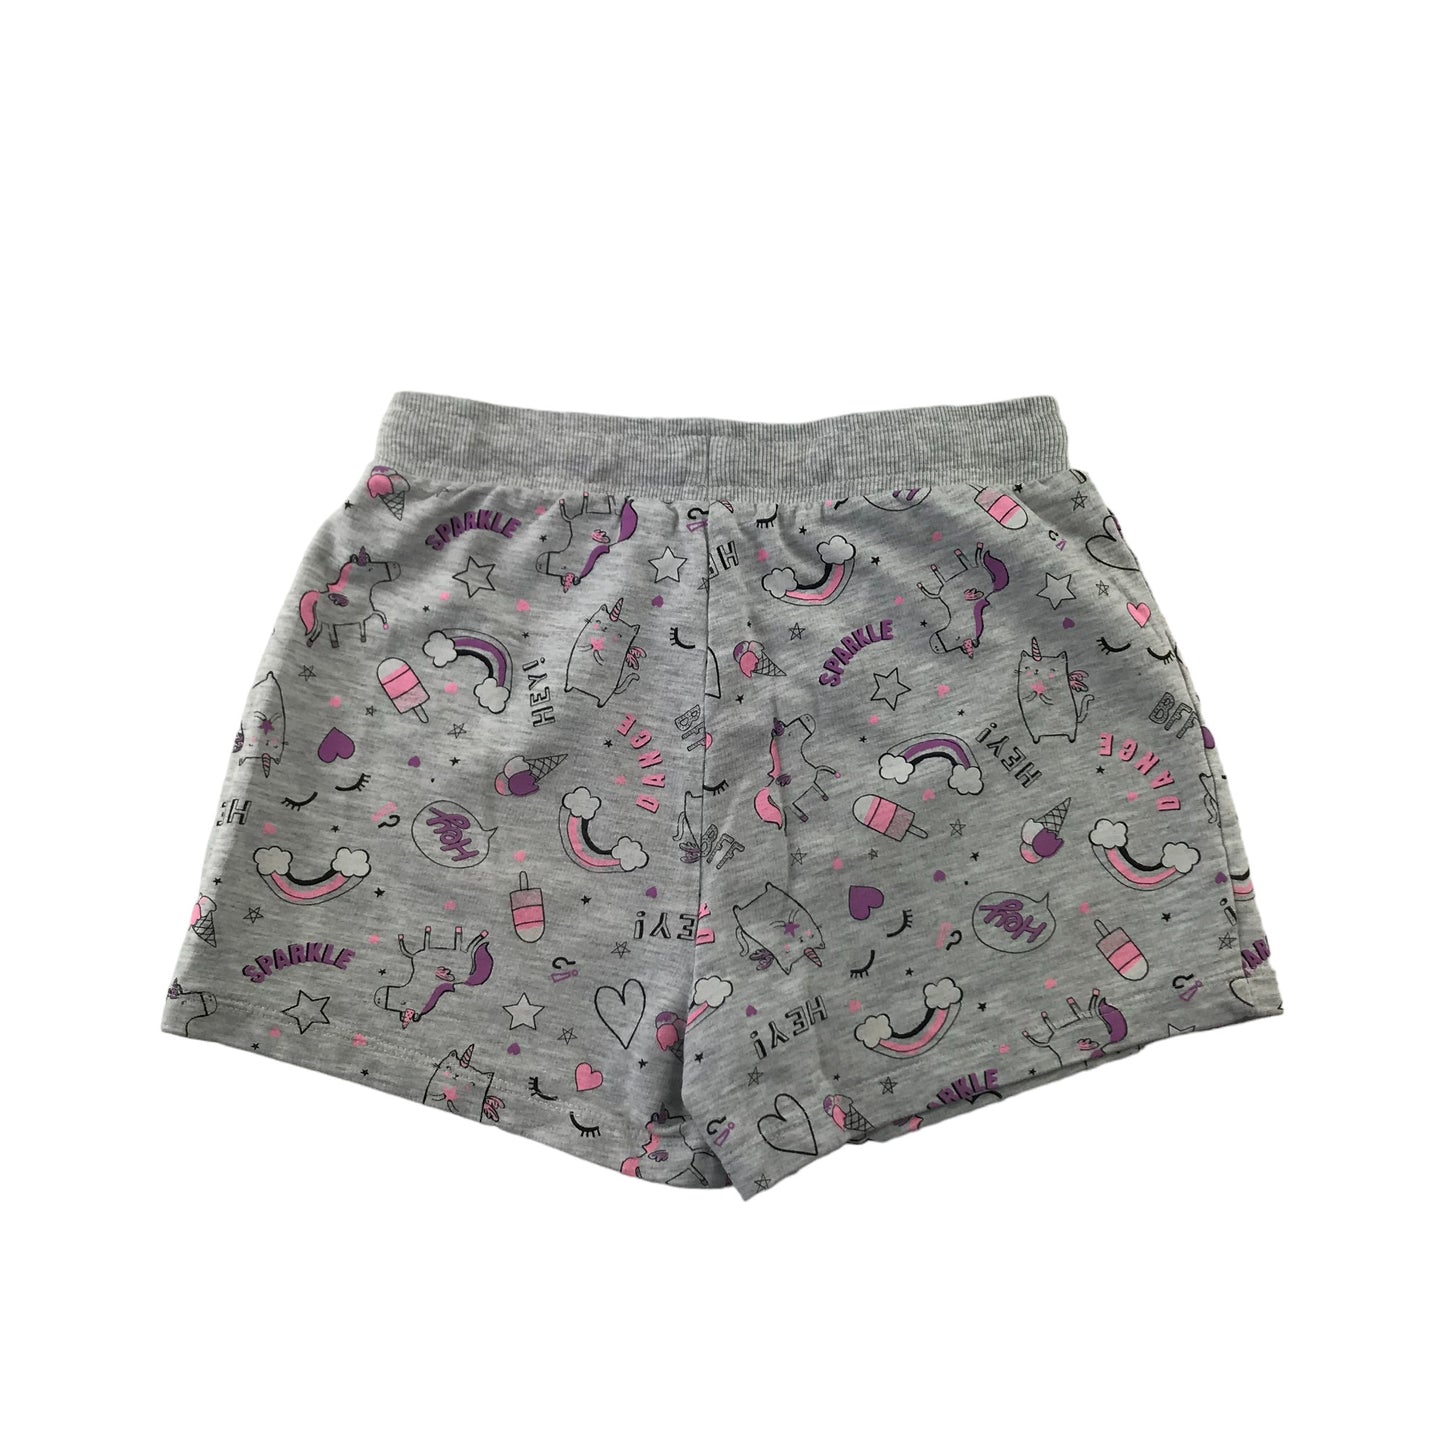 George Shorts Set Age 10 Pink and Grey Print Pattern Jersey